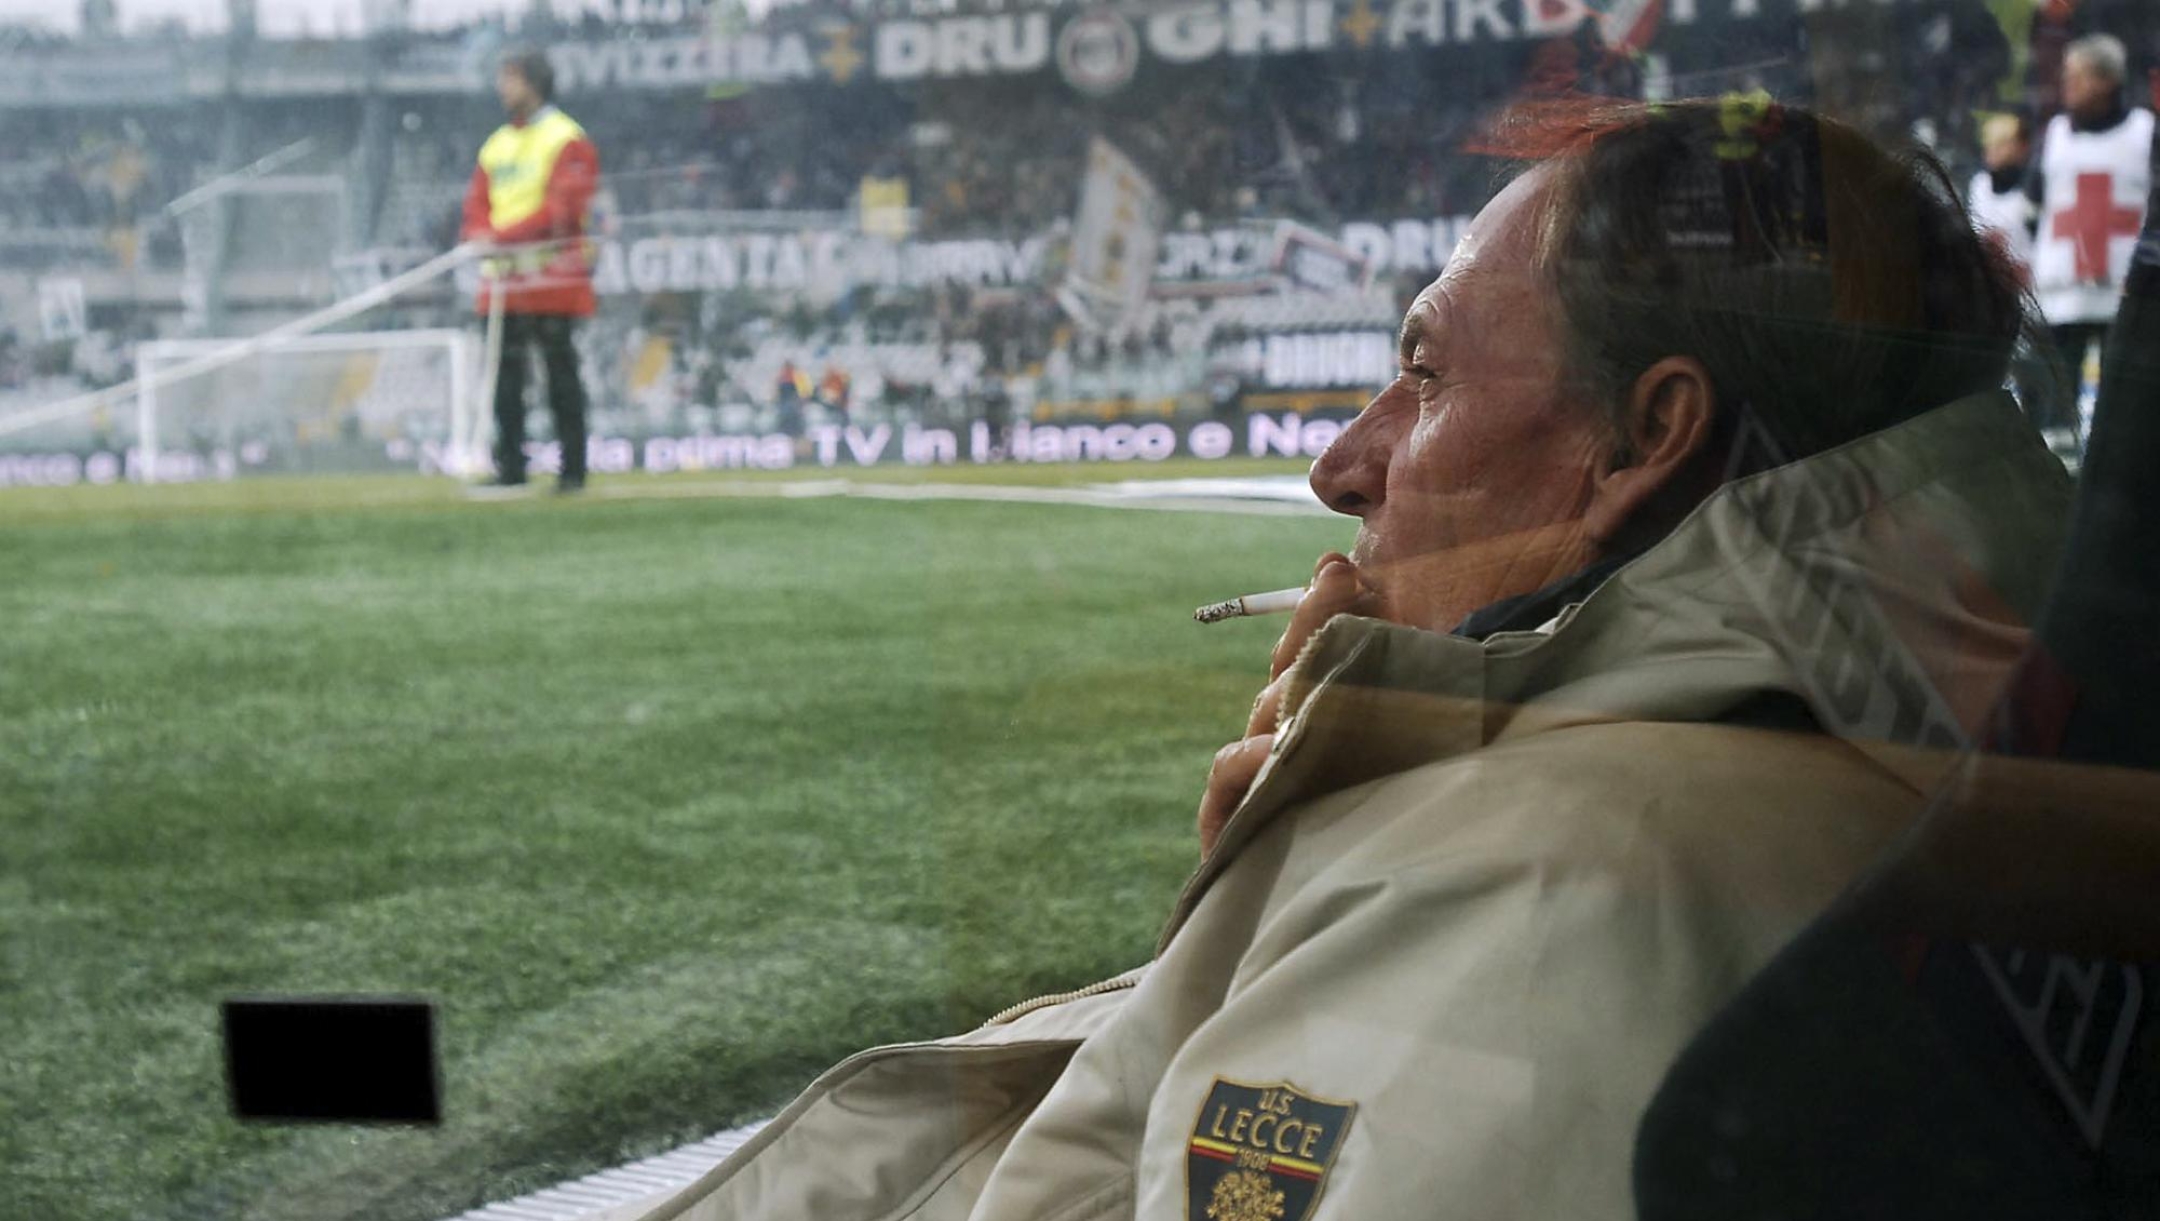 Lecce Czech coach Zdenek Zeman looks on prior to the start of an Italian second division soccer match between Juventus and Lecce, in Turin, Italy, Saturday, Nov. 25, 2006. (AP Photo/Massimo Pinca)